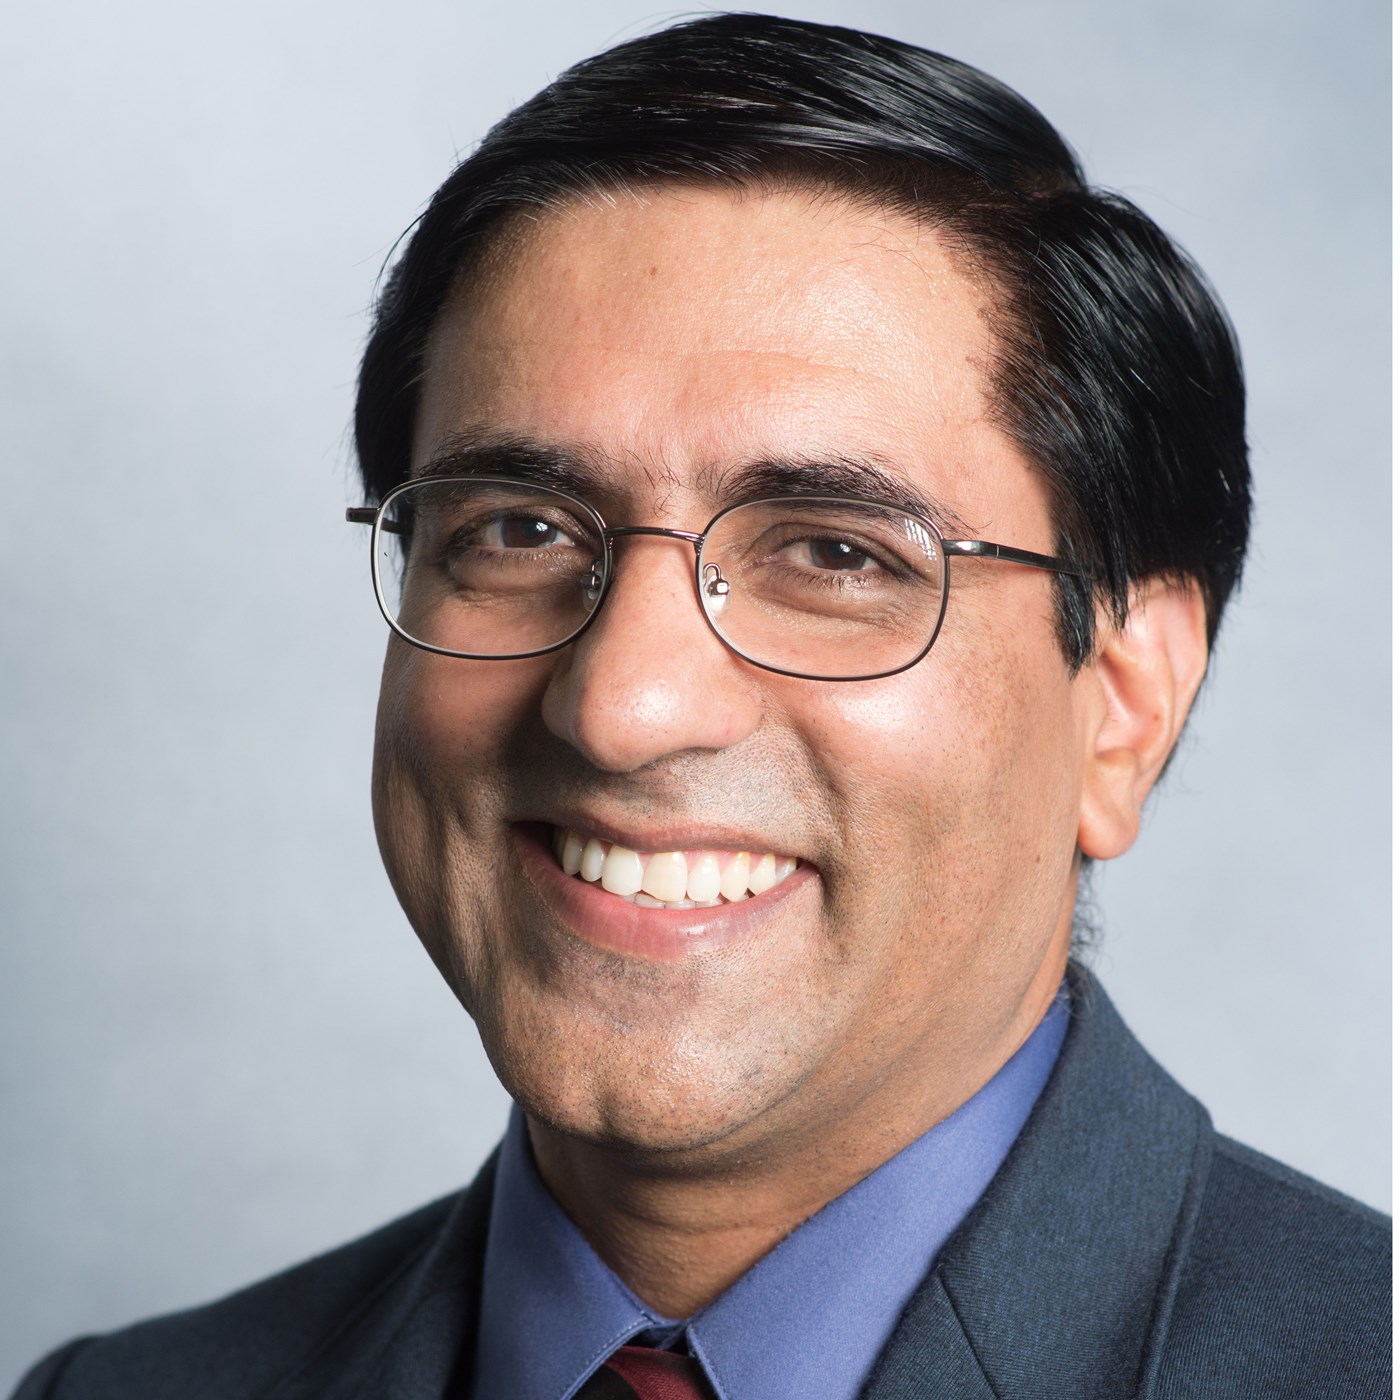 Vijayendra Kumar joined the Office of Technology Commercialization (OTC) in May 2015. Vijayendra comes to this position with 11 years of extensive industrial and academic experience in the field of Organic/Polymer/Material Chemistry as well as in-depth and well-documented research expertise. Prior to joining OTC, he worked at Polnox Corporation as Senior Scientist for 7 years and as Postdoctoral Research Associate in the Department of Chemistry at University of Massachusetts Lowell for 4 years. 